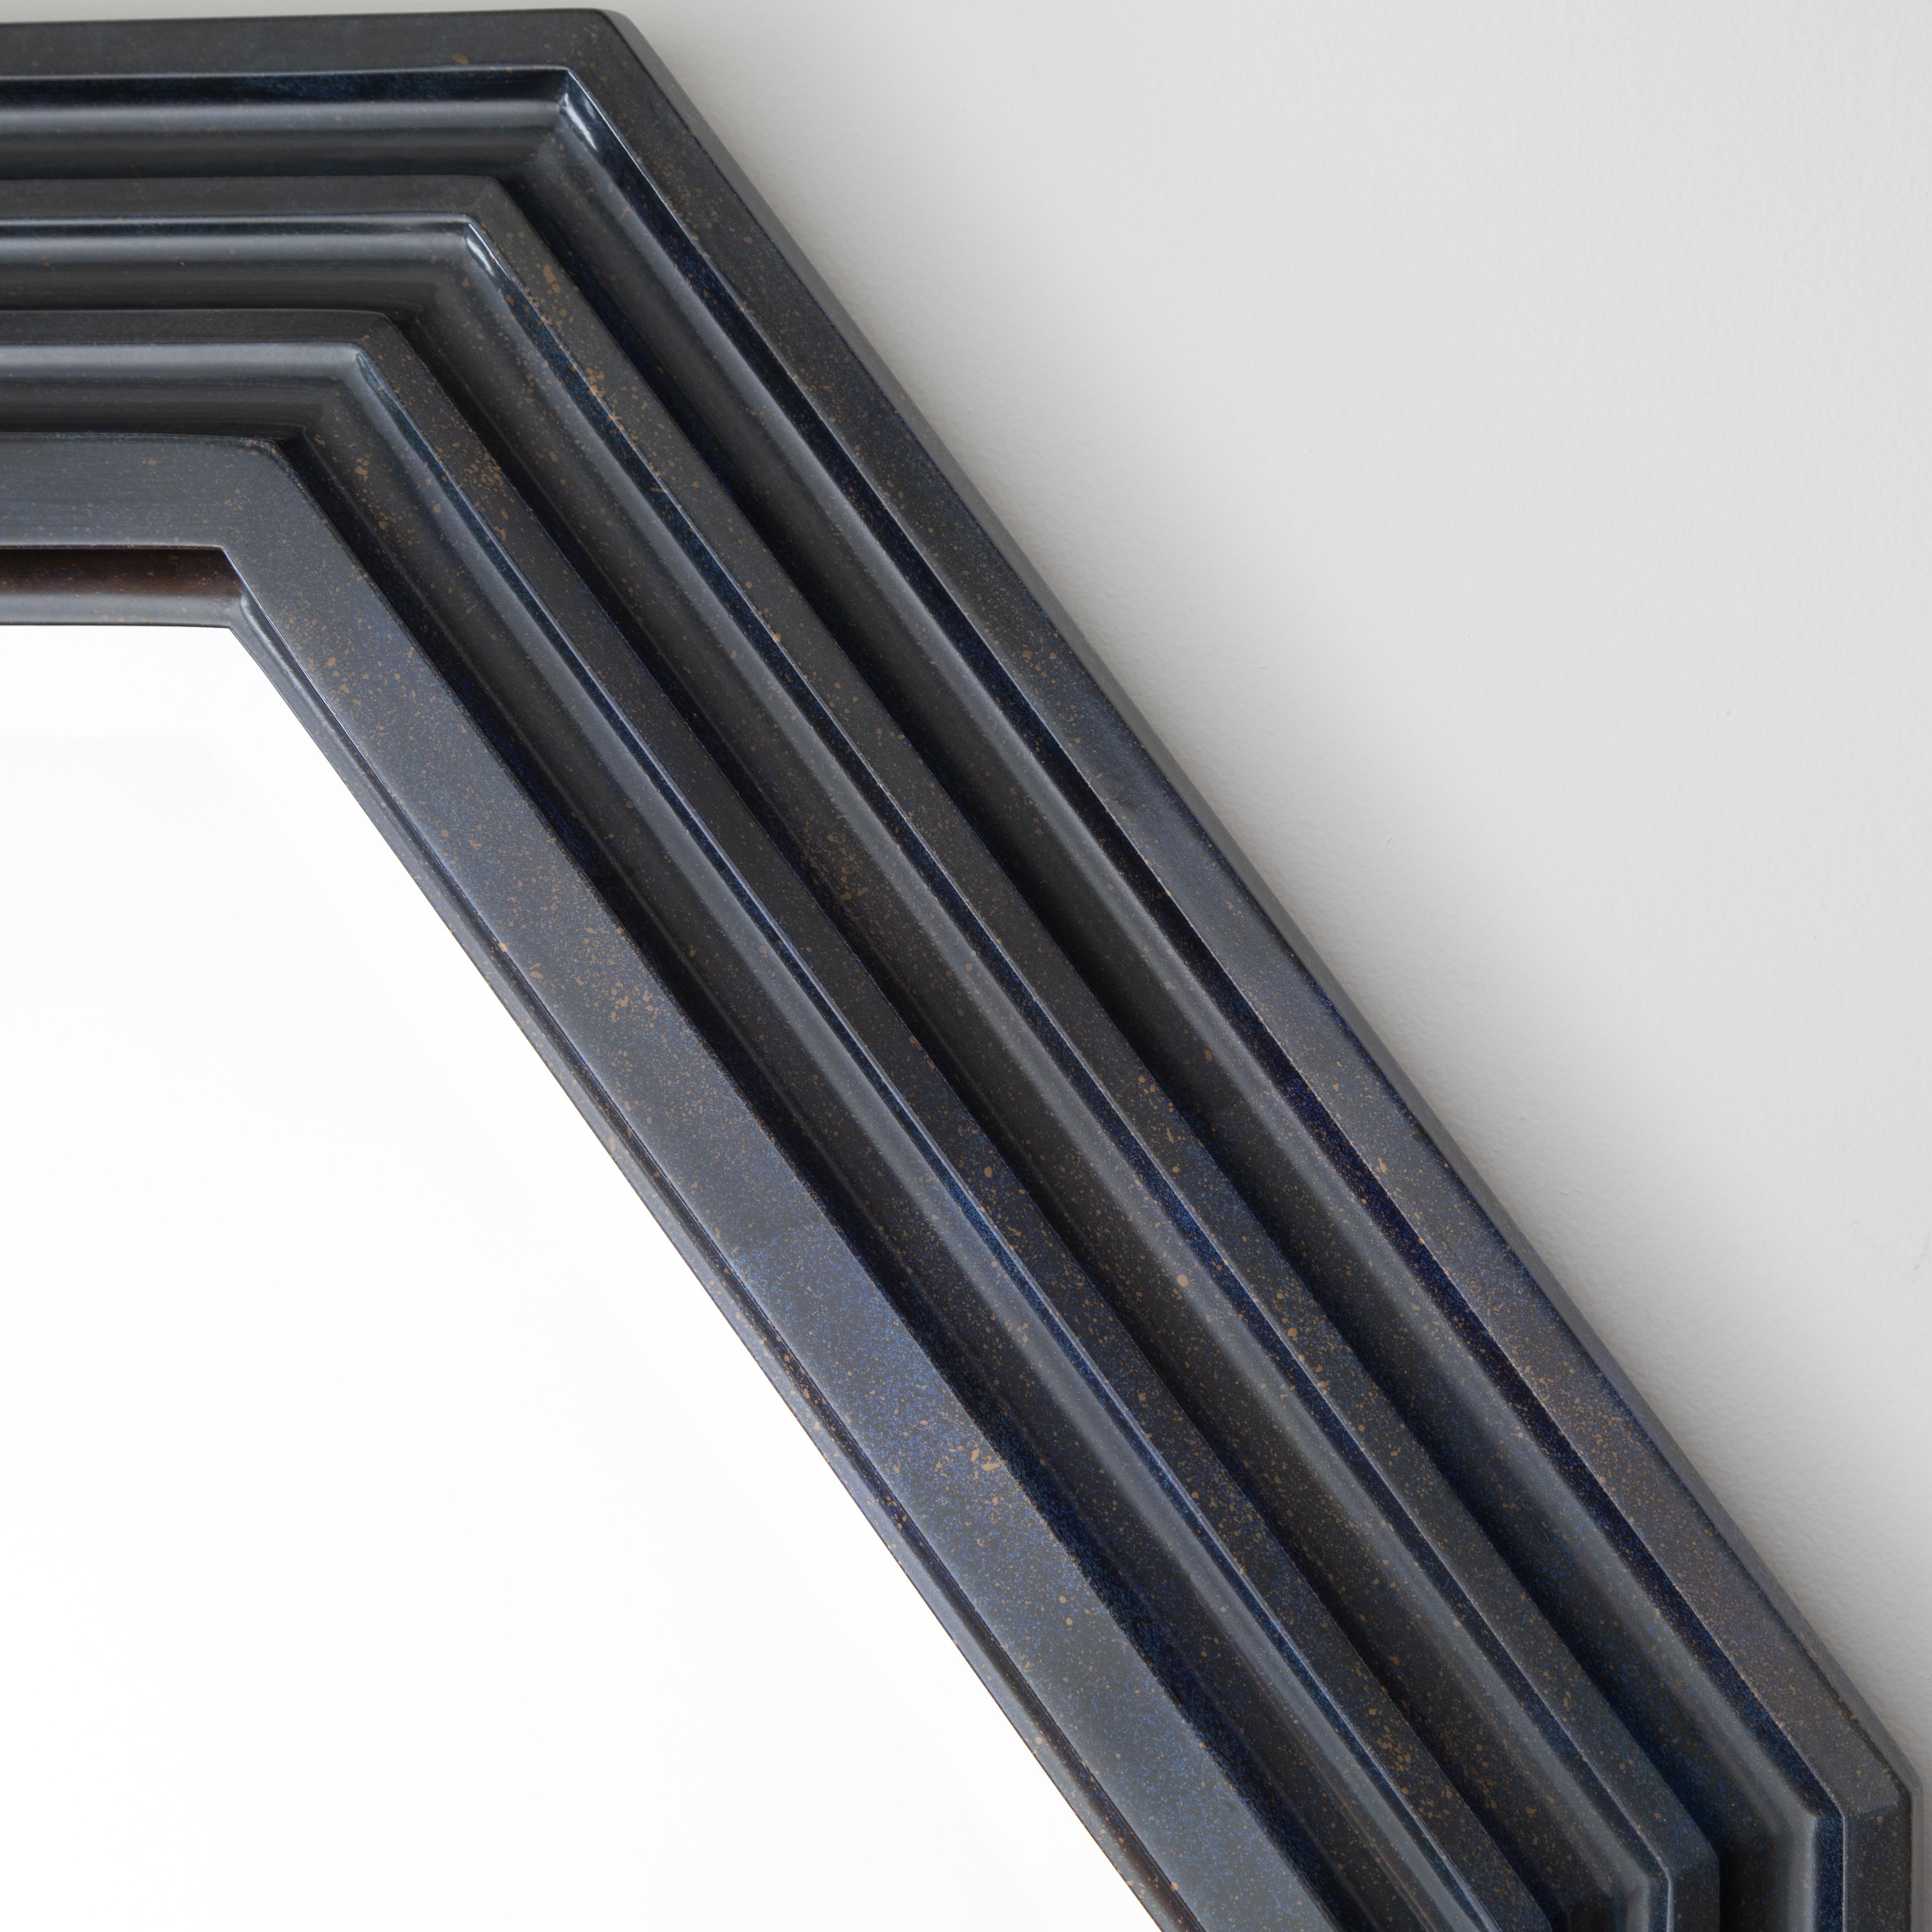 Beveled Karl Springer Octagonal Mirror in a Faux-Lapis Lacquer Finish, circa 1989